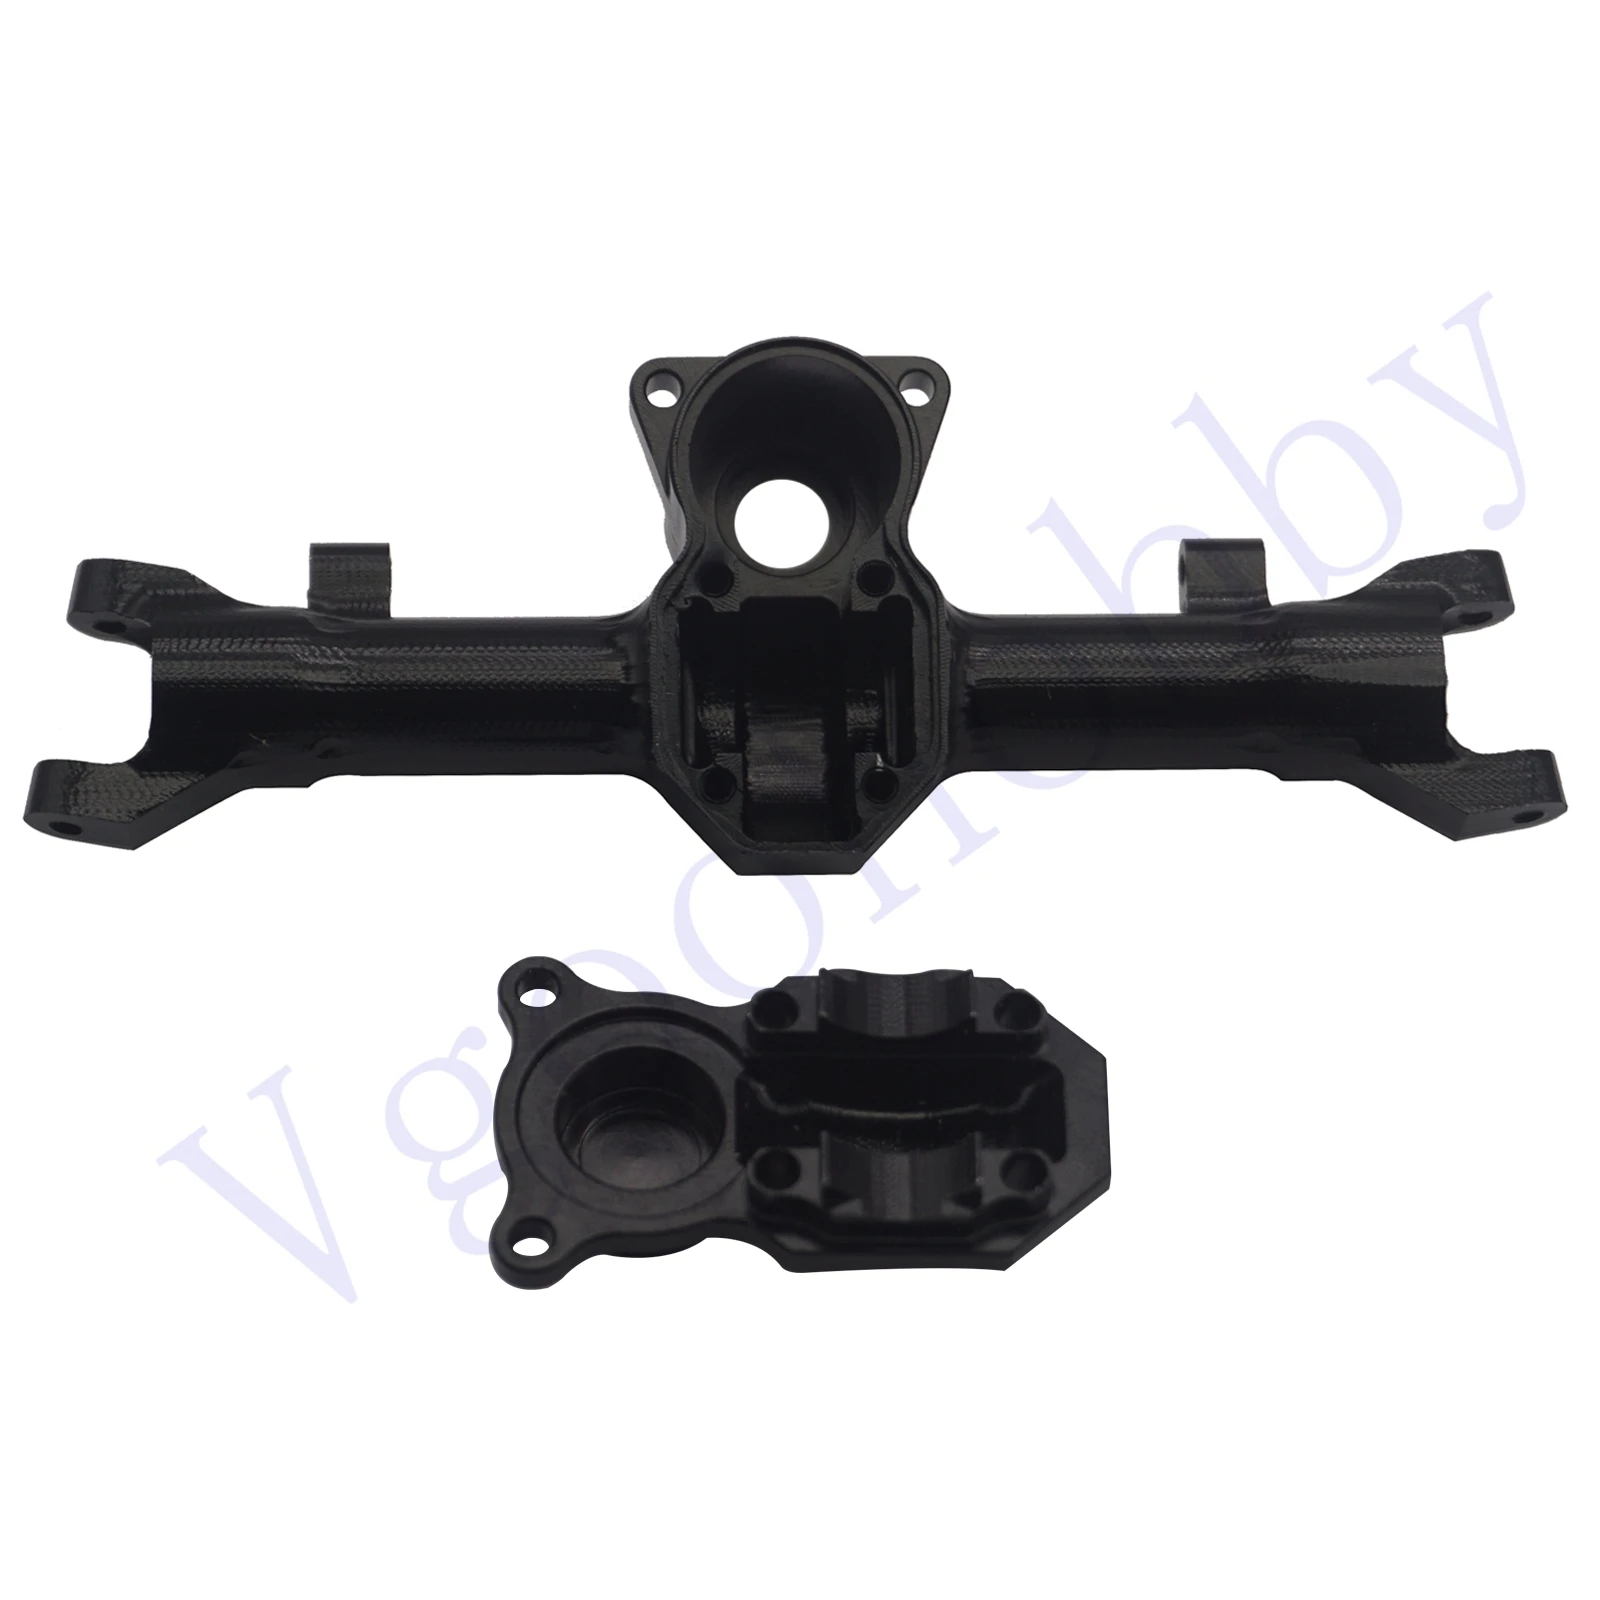 Vgoohobby Aluminum Alloy Axle Housing Case Diff Front Housing Upgrade Part Compatible with Axial SCX24 90081 AXI00002 1/24 RC Crawler Car 